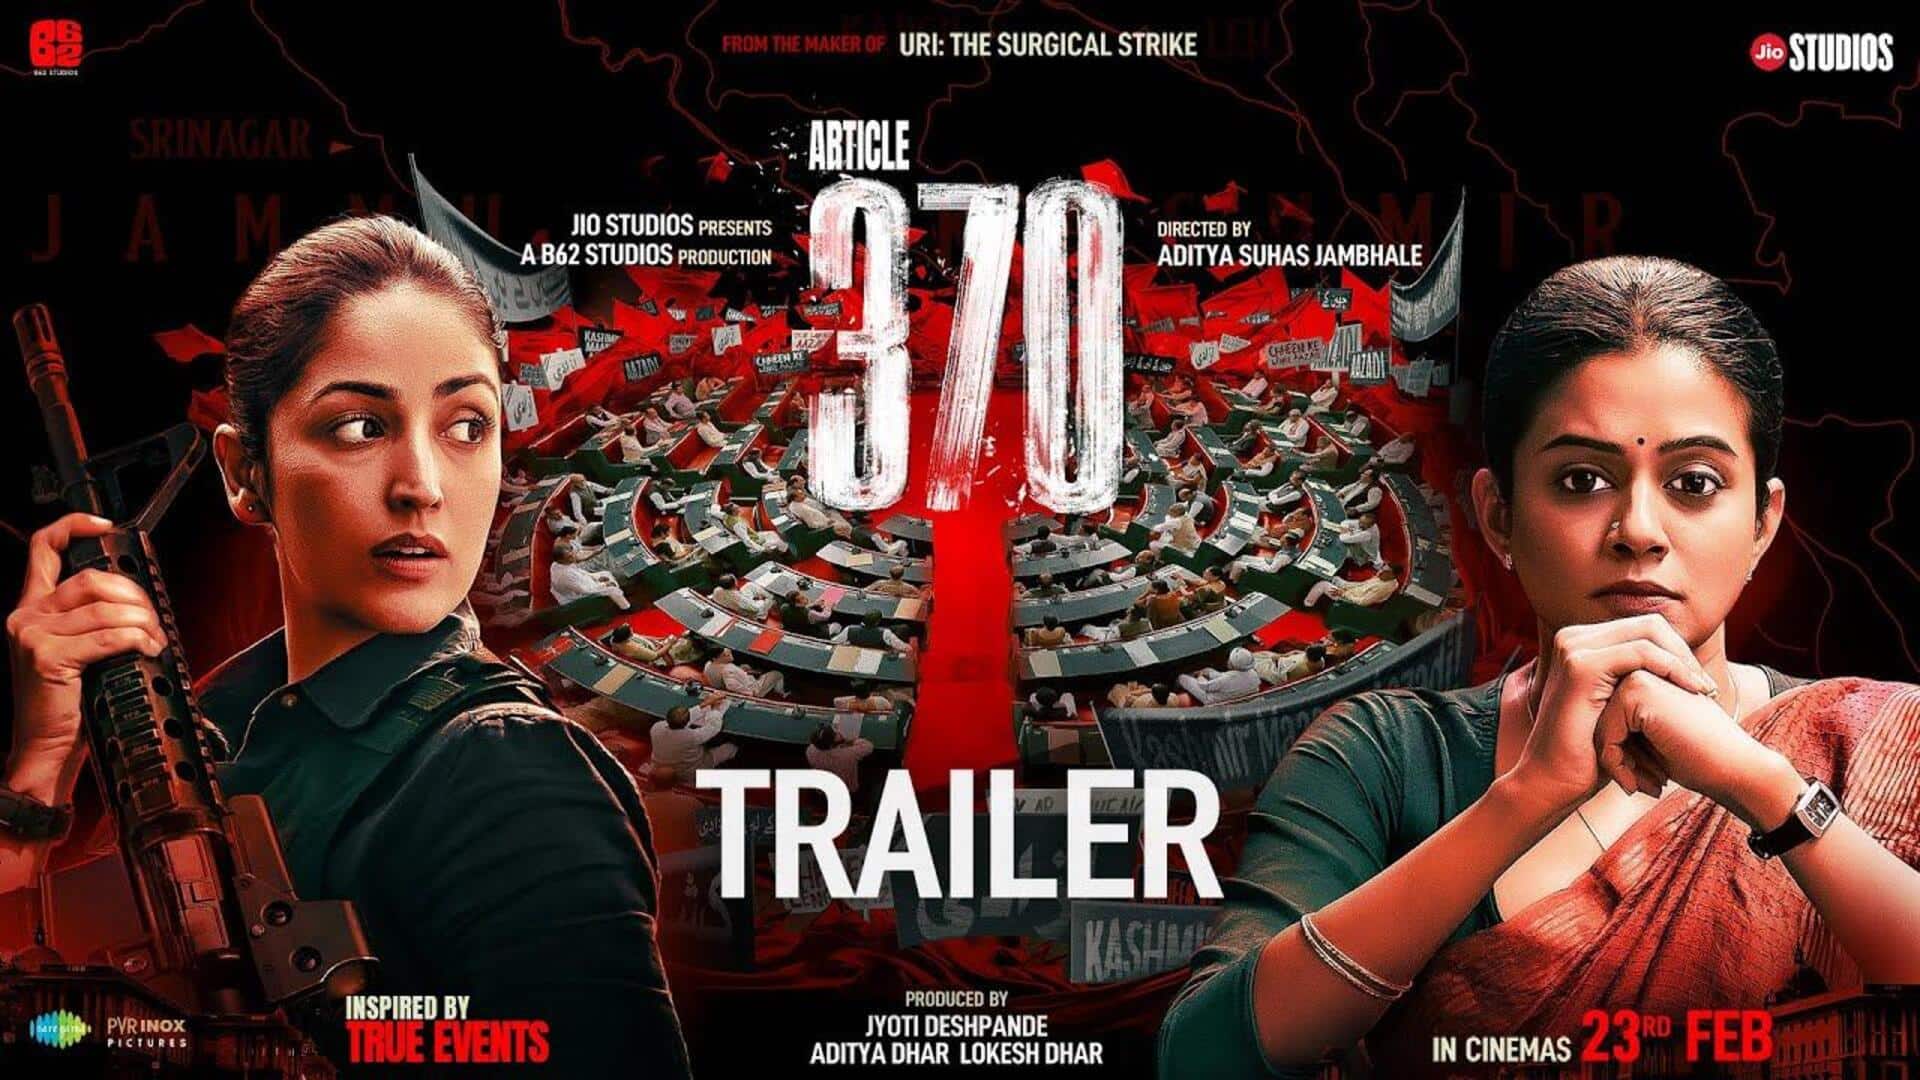 Box office collection: 'Article 370' to bow out soon